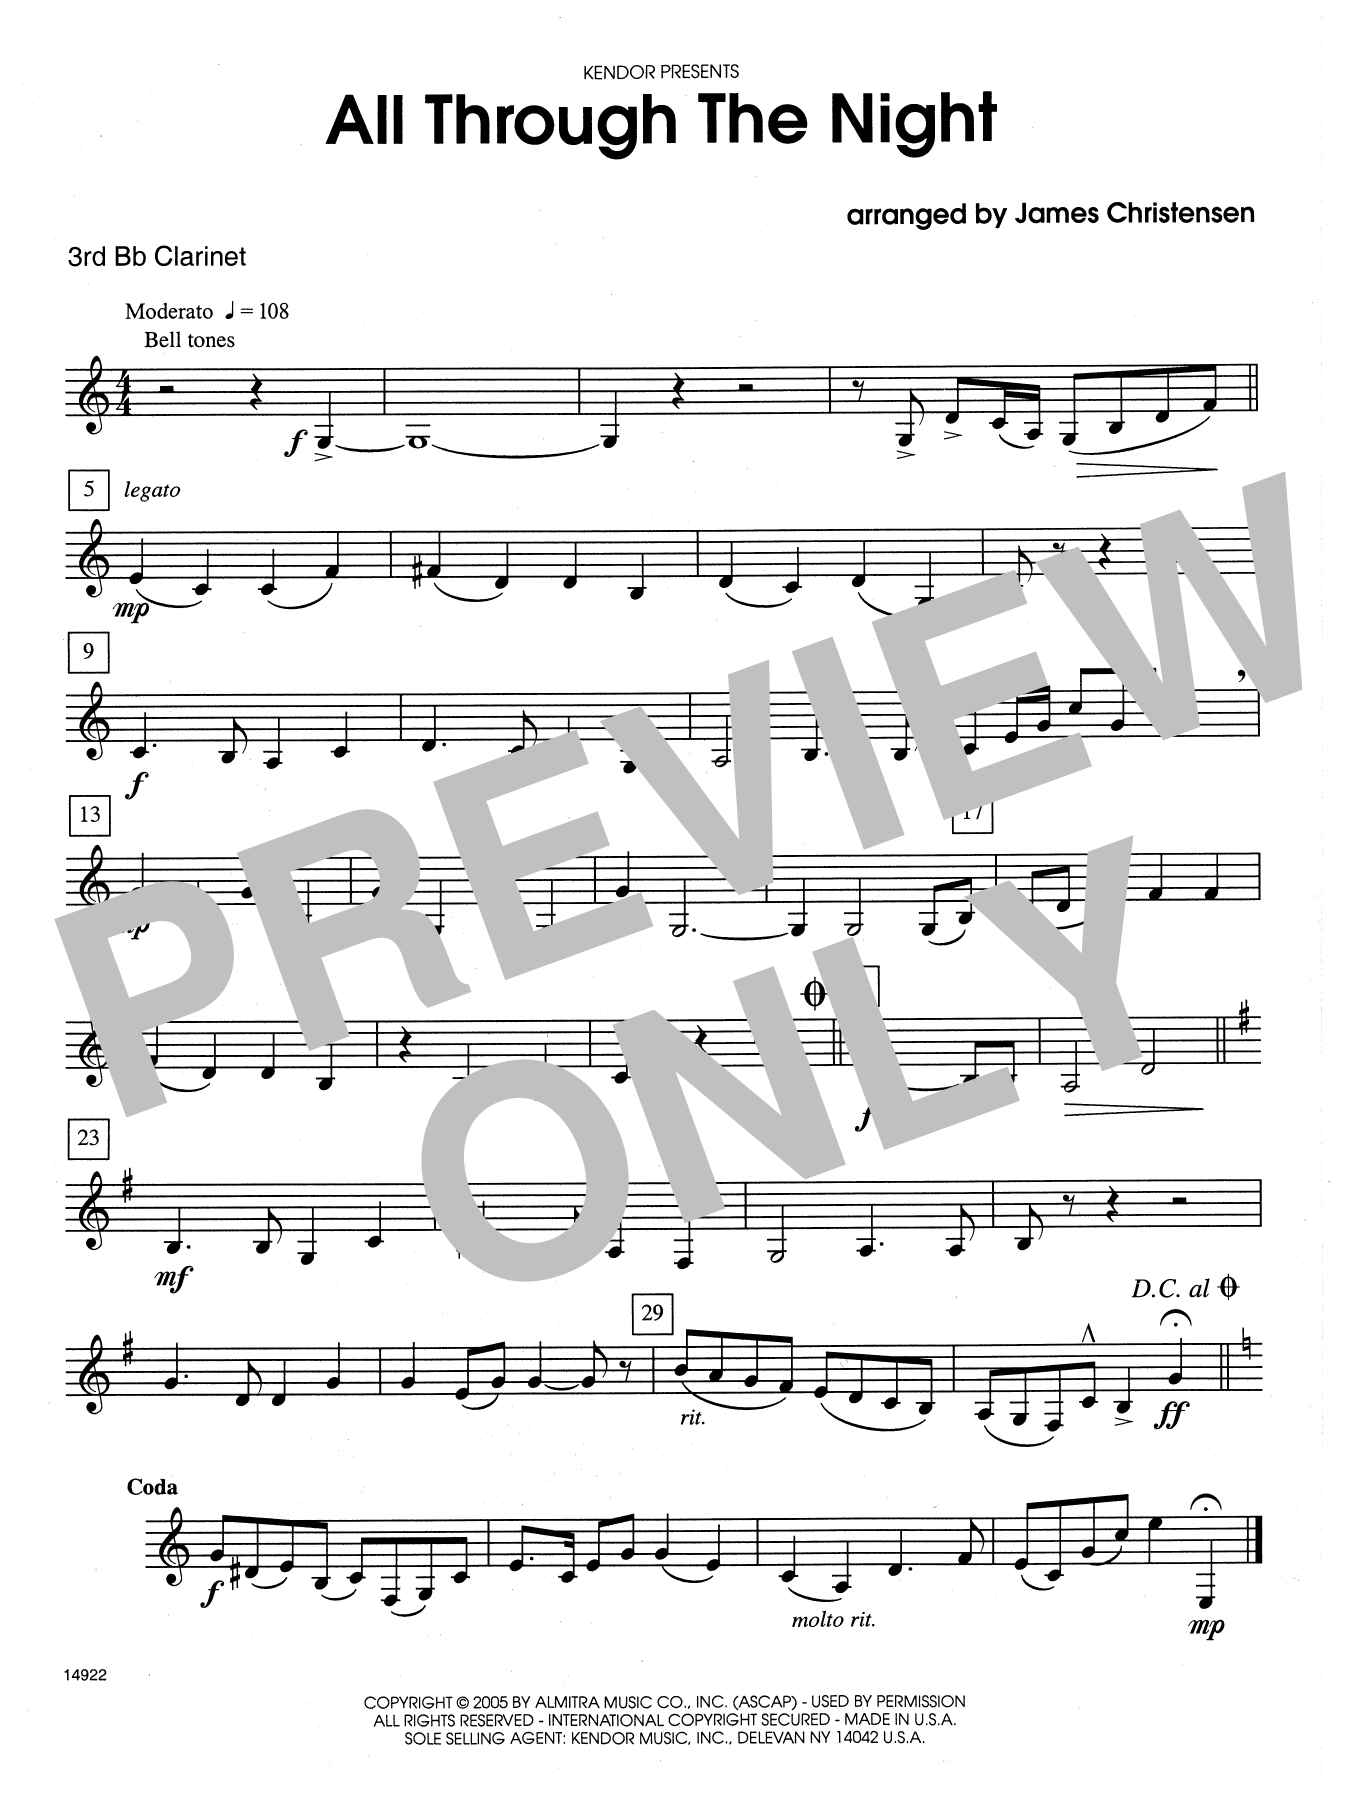 James Christensen All Through the Night - 3rd Bb Clarinet sheet music notes and chords. Download Printable PDF.